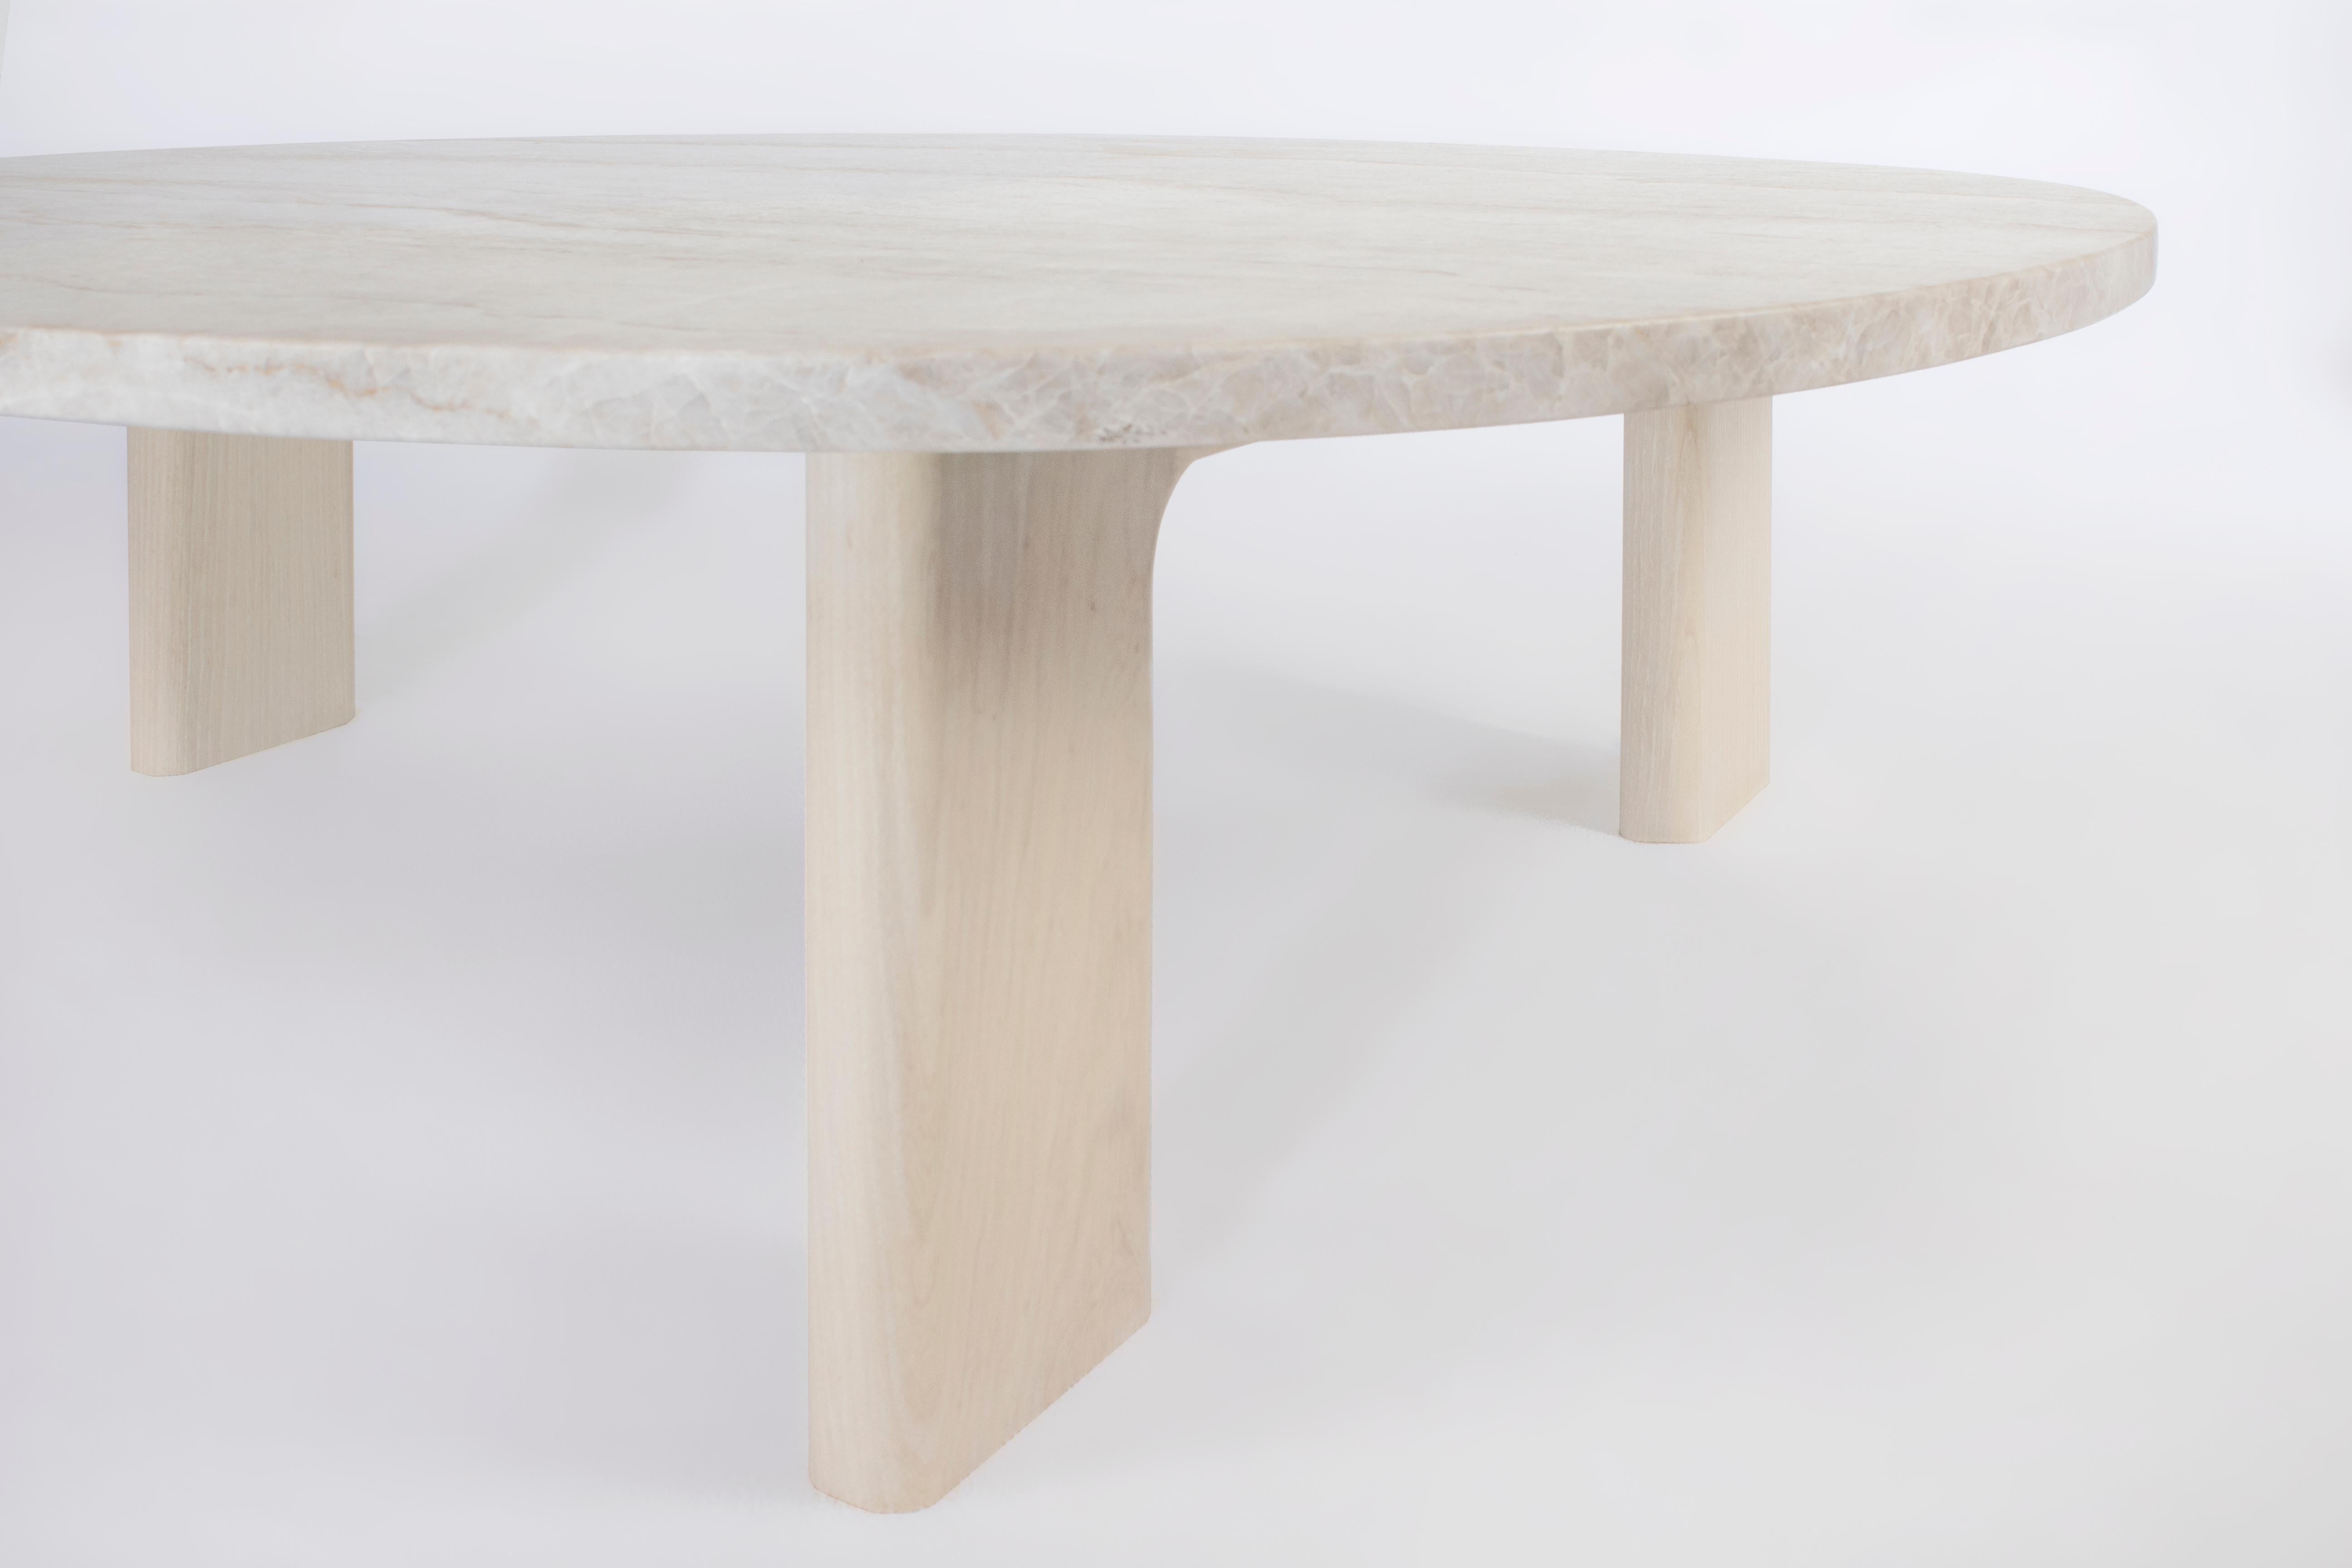 The Vesta Table strikes a balance between comfortable and refined. An organic, curving marble top rests on three solid but shaped wooden legs, combining the relaxed feel of solid wood with a cool refined marble surface. Some customization available,